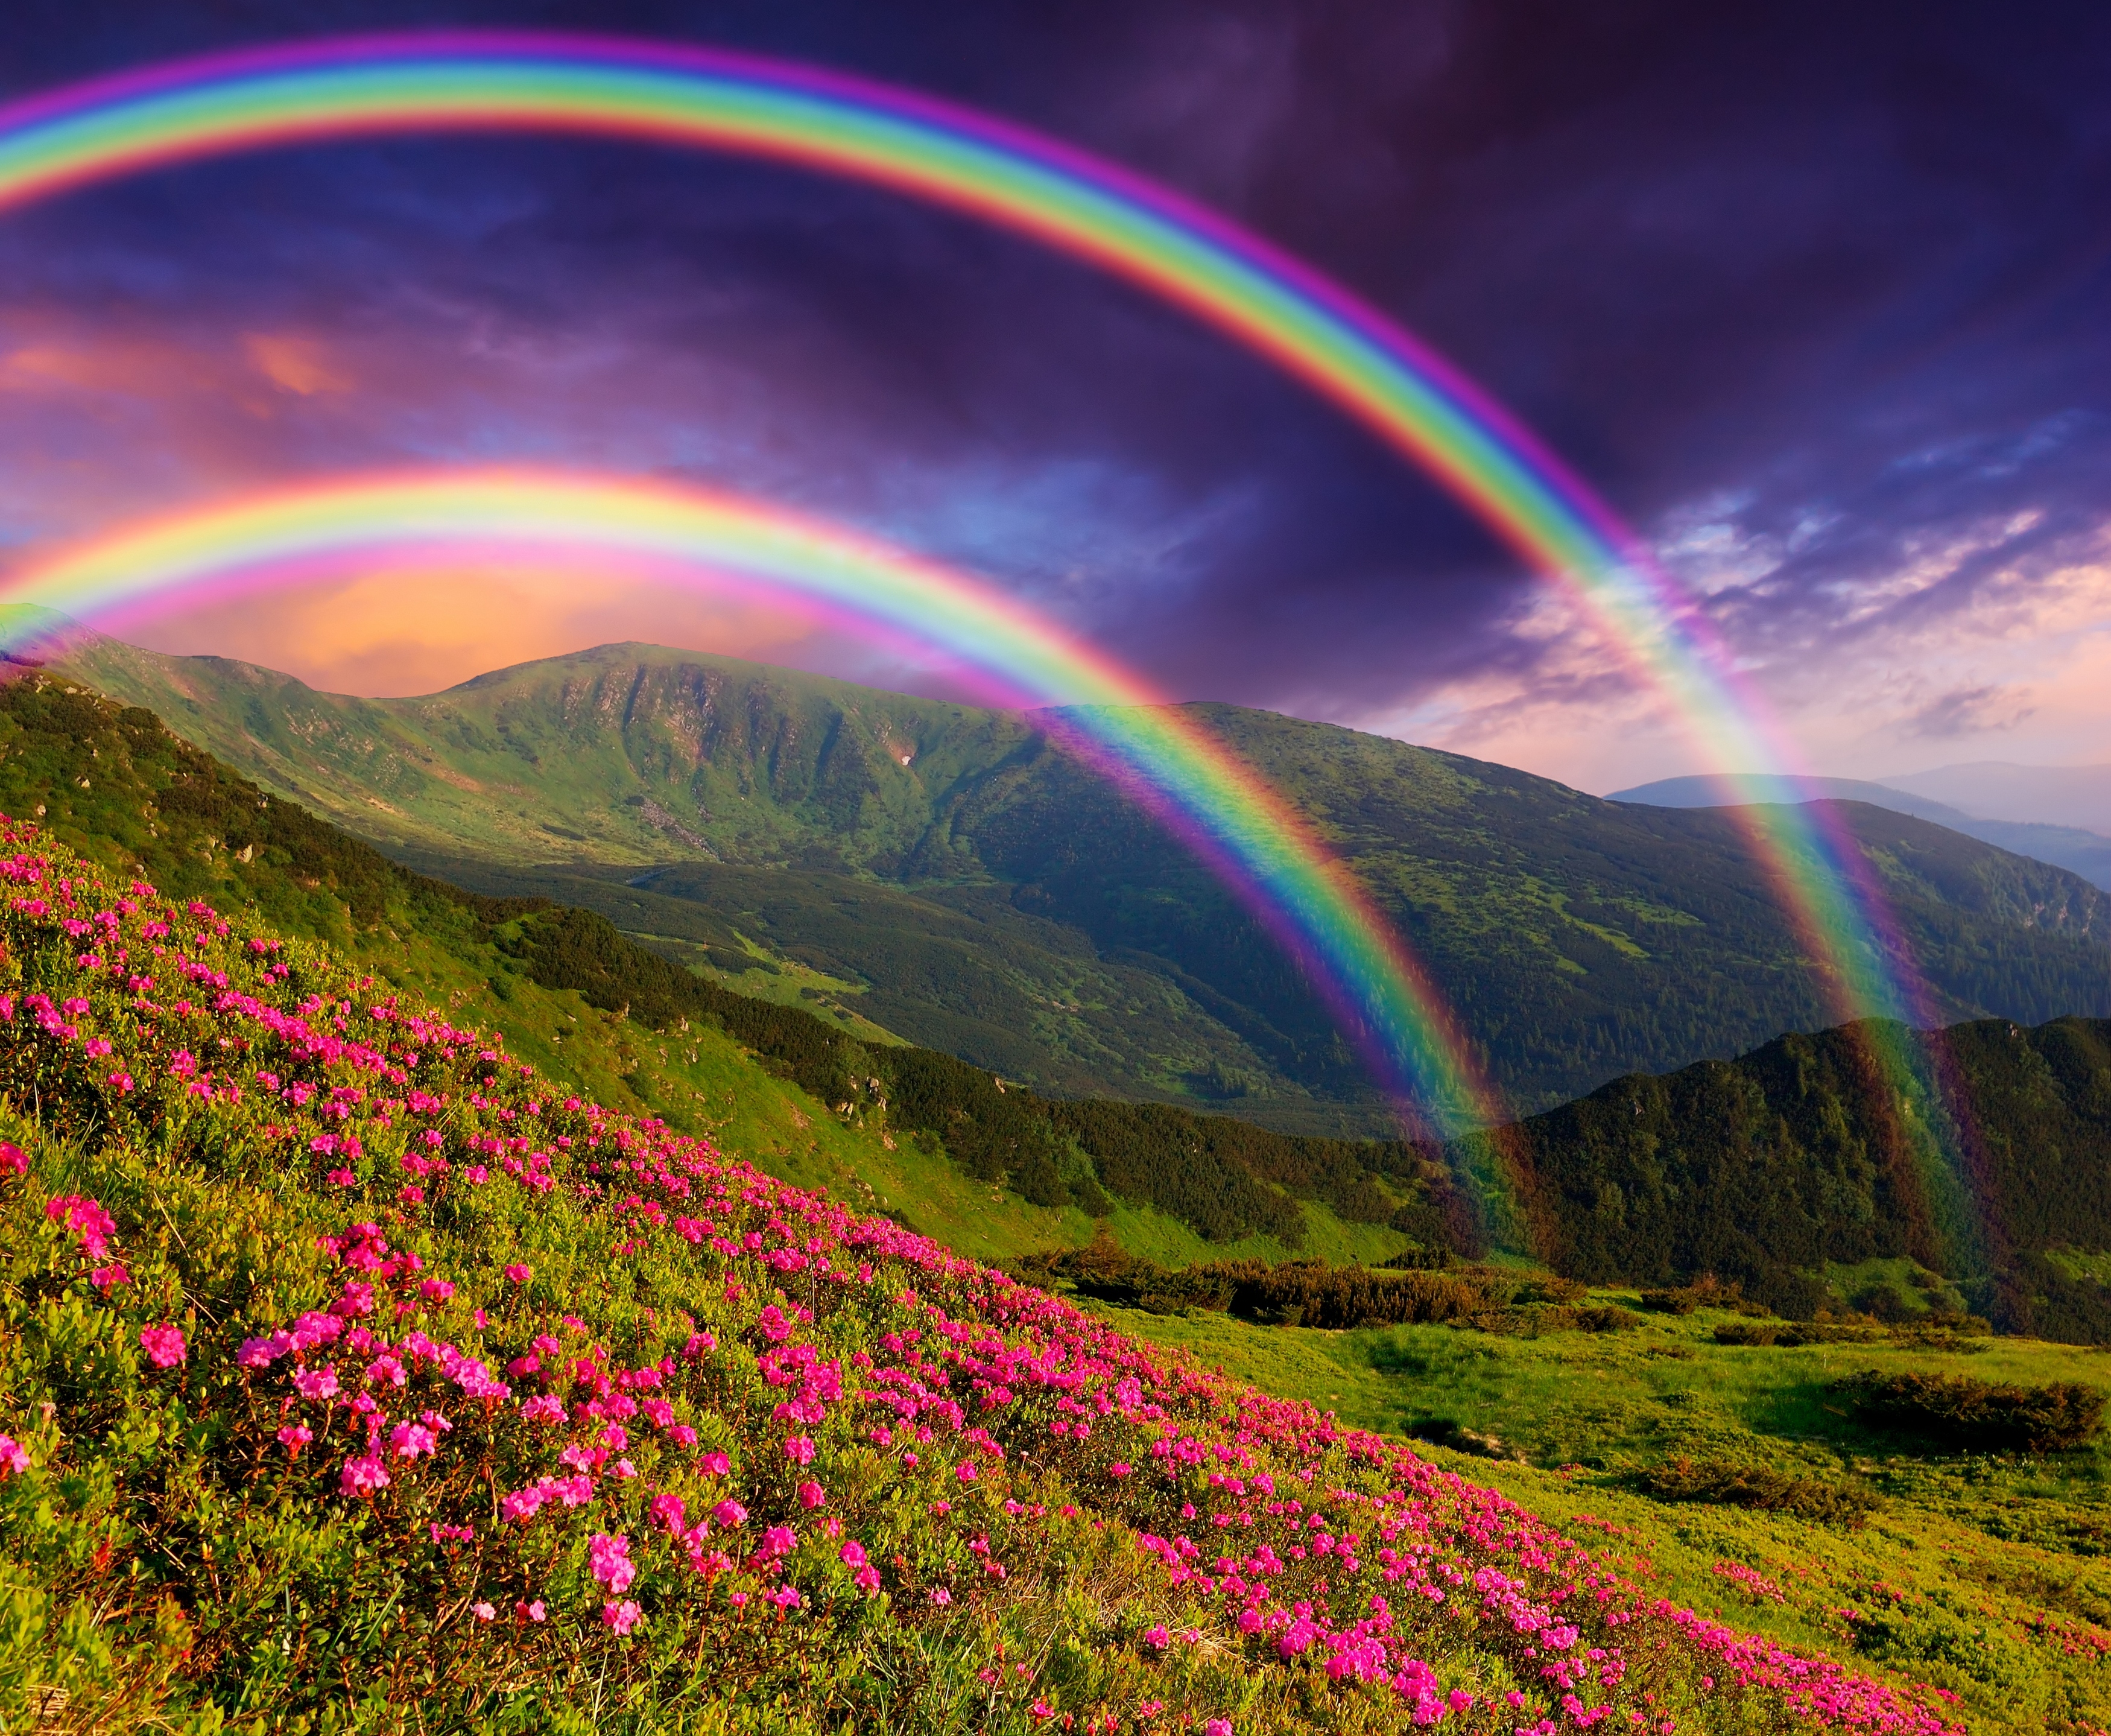 Double rainbow in the mountains